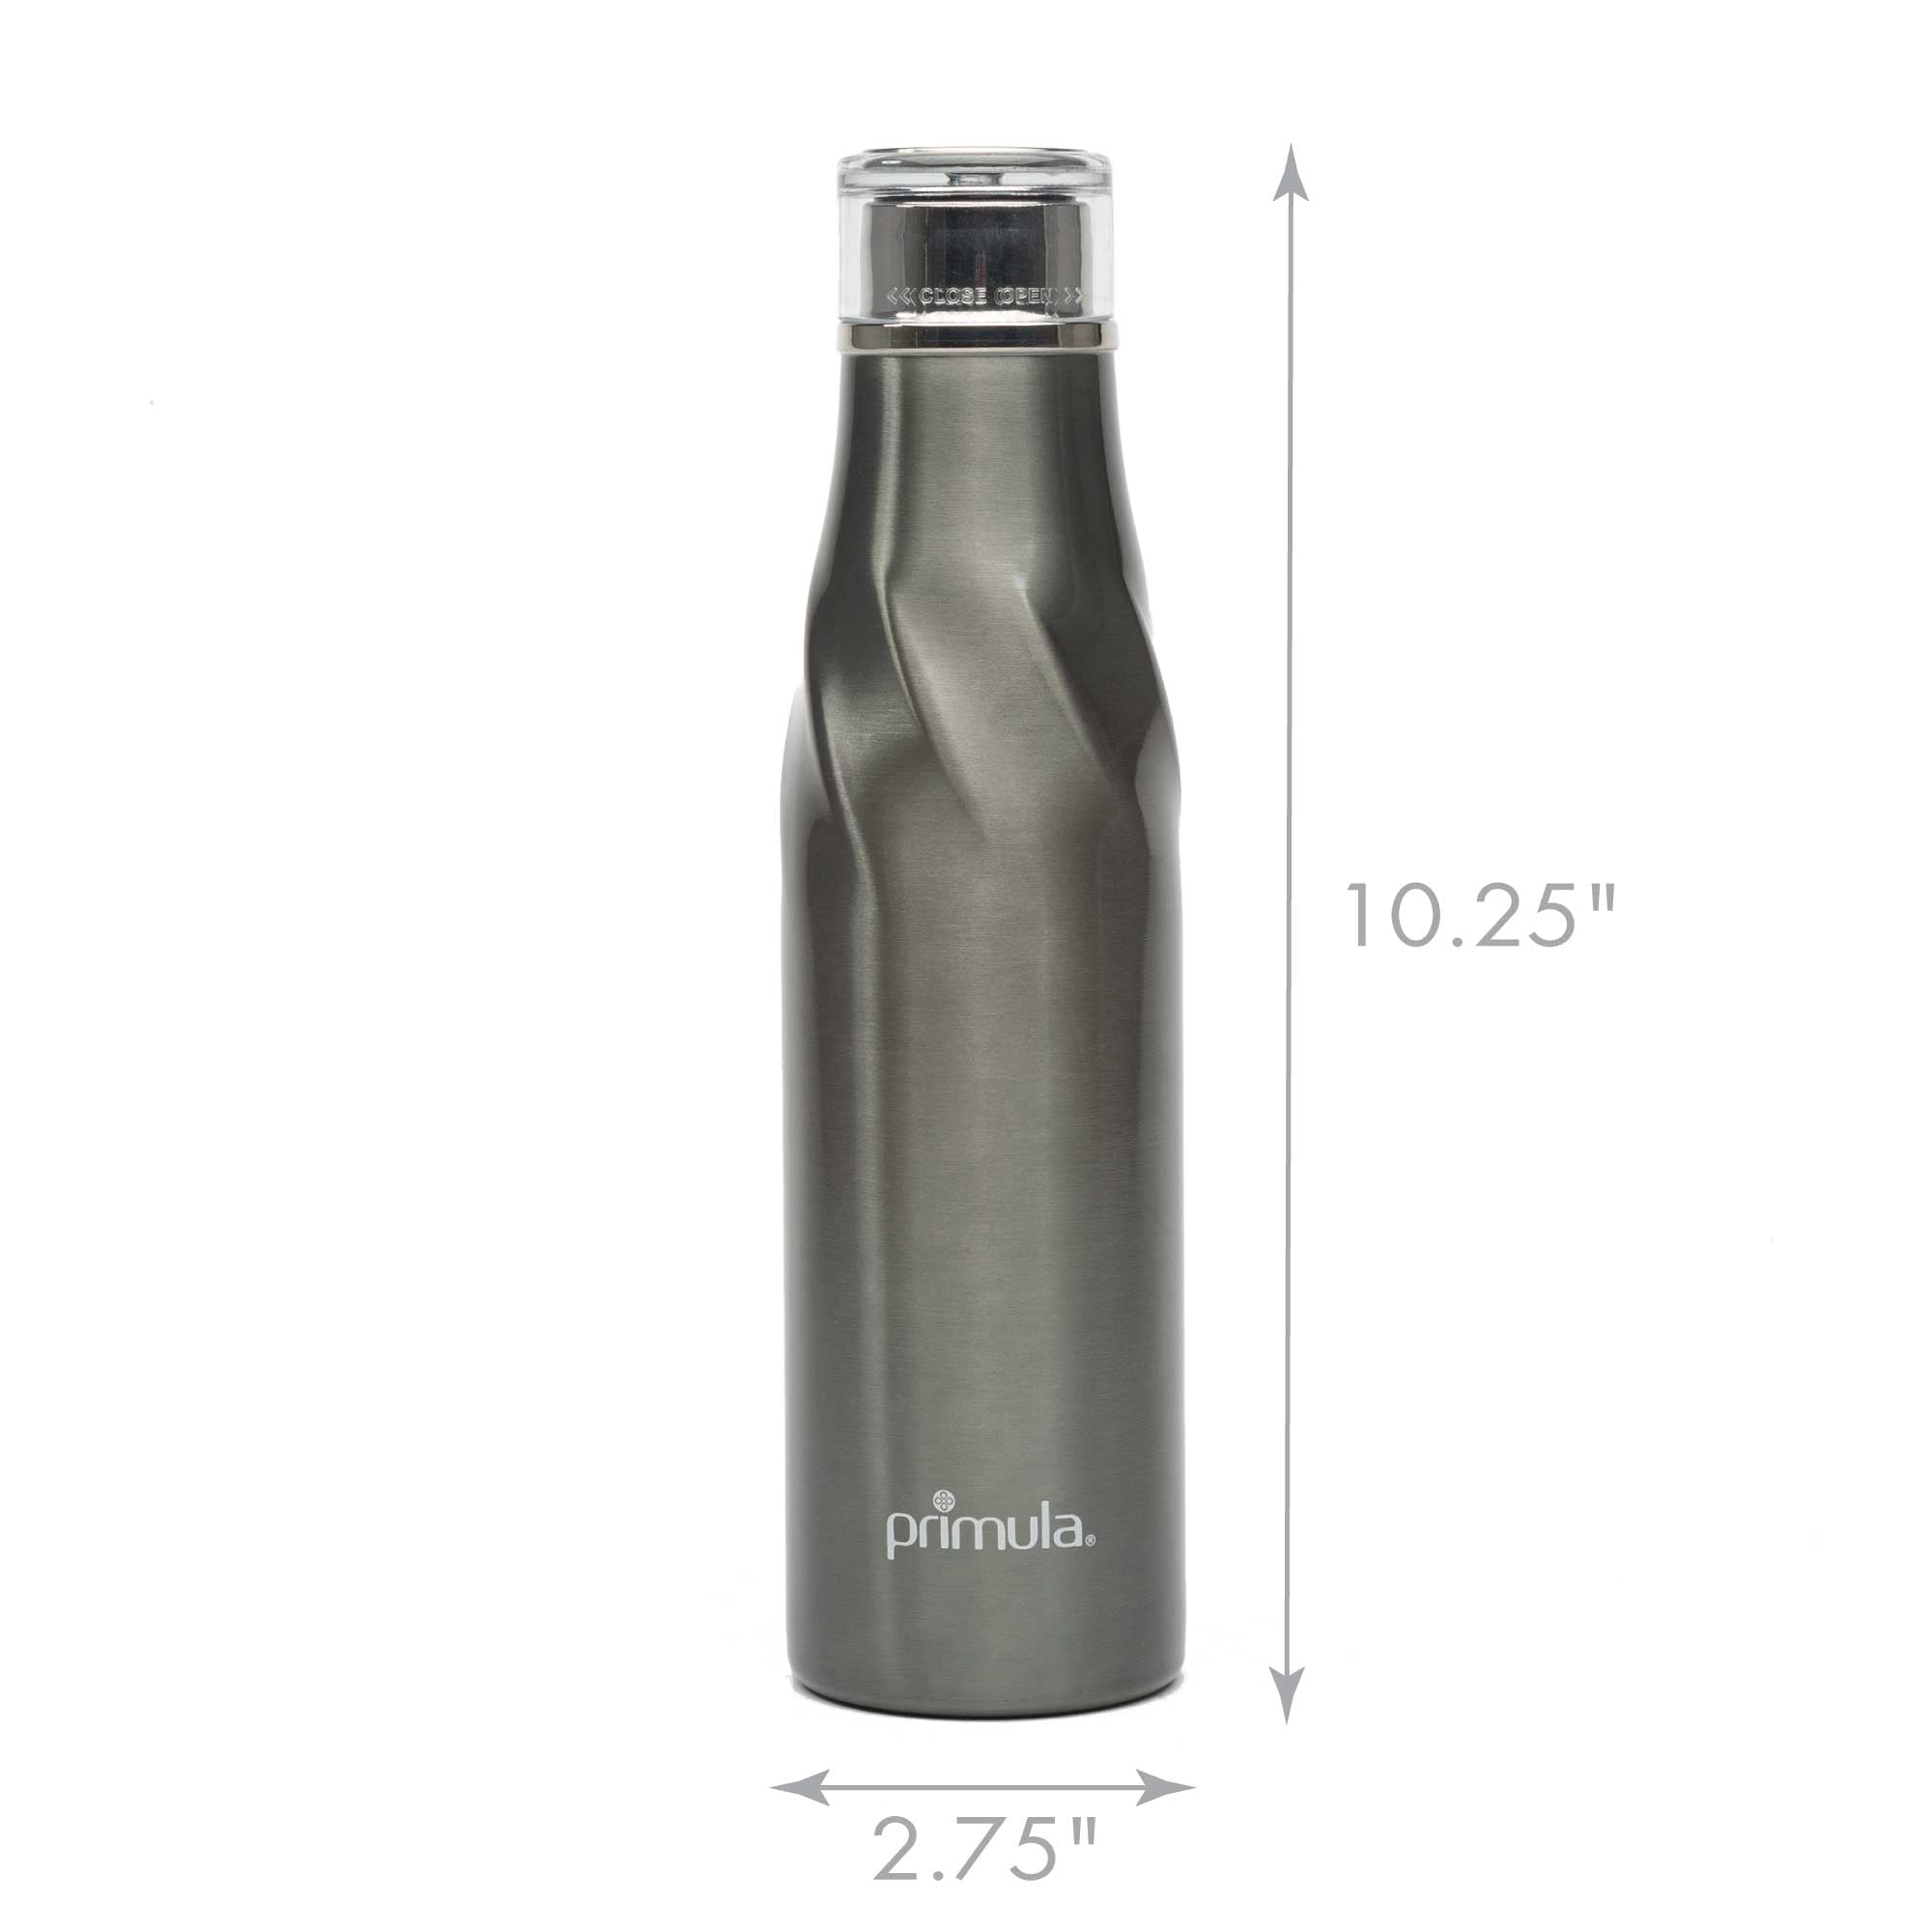 Primula Stainless Steel Water Bottle with Wide Mouth and Screw Cap, 18 Ounces, Gunmetal Gray